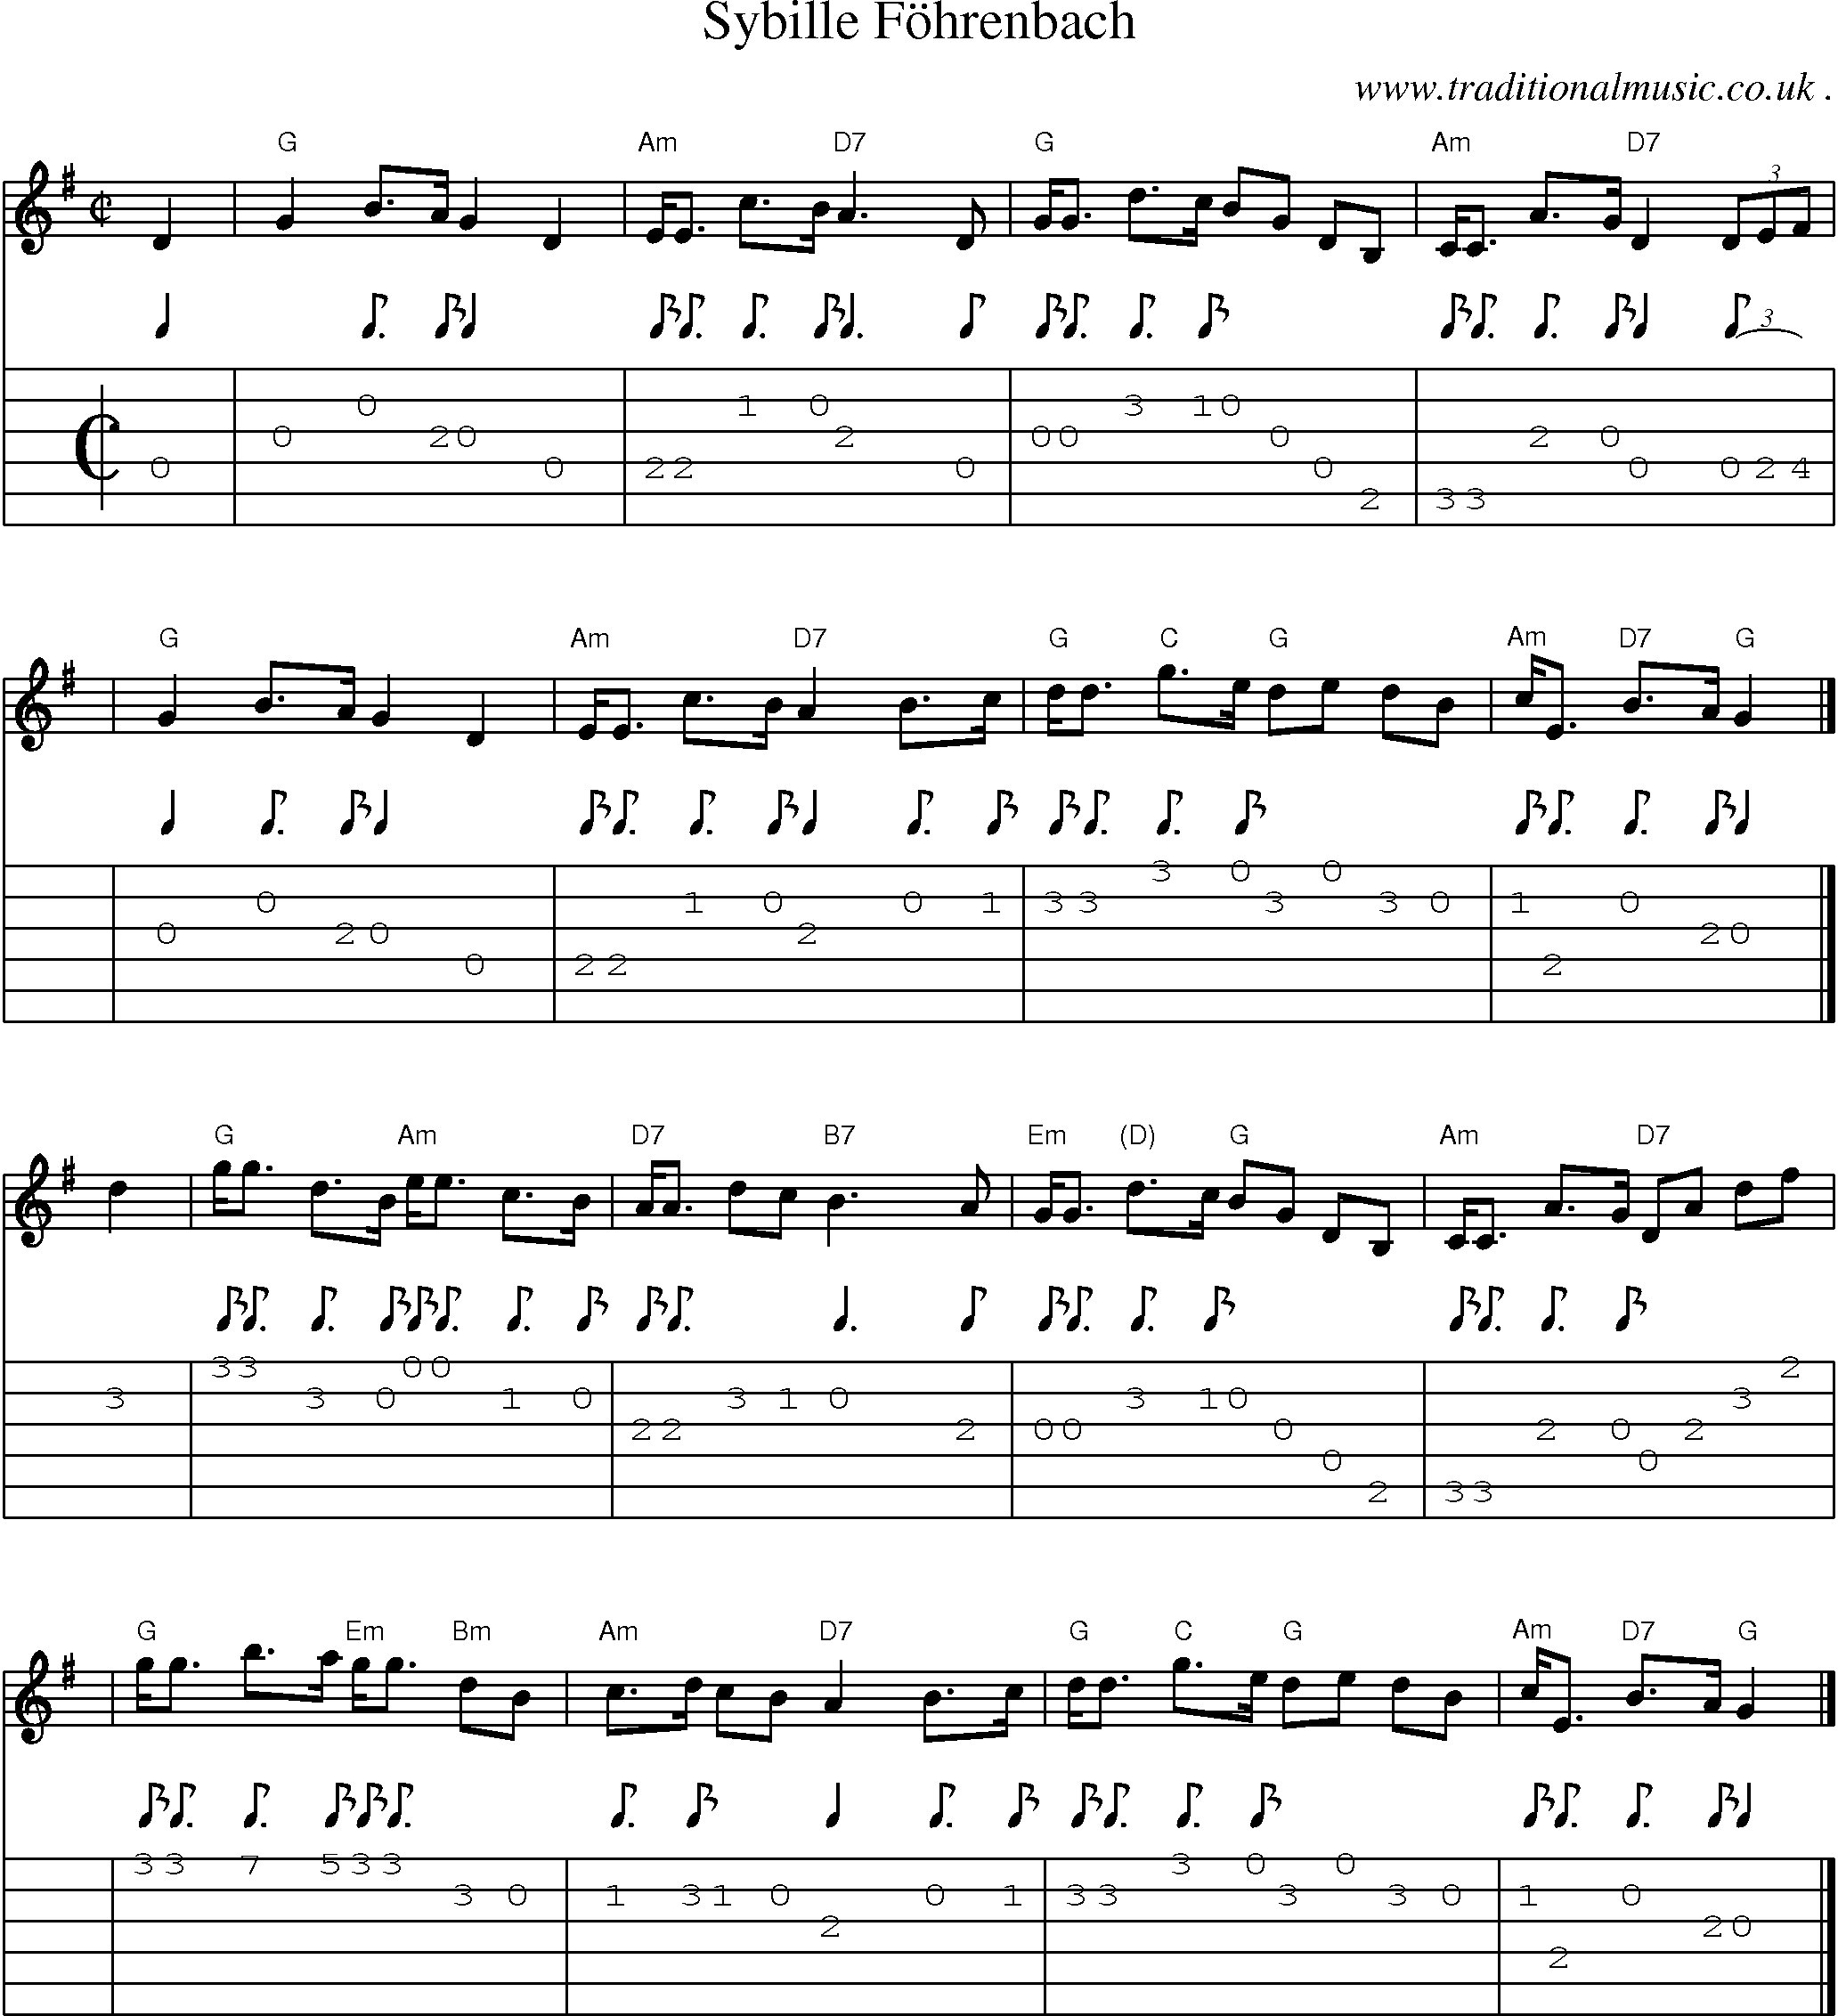 Sheet-music  score, Chords and Guitar Tabs for Sybille Fohrenbach